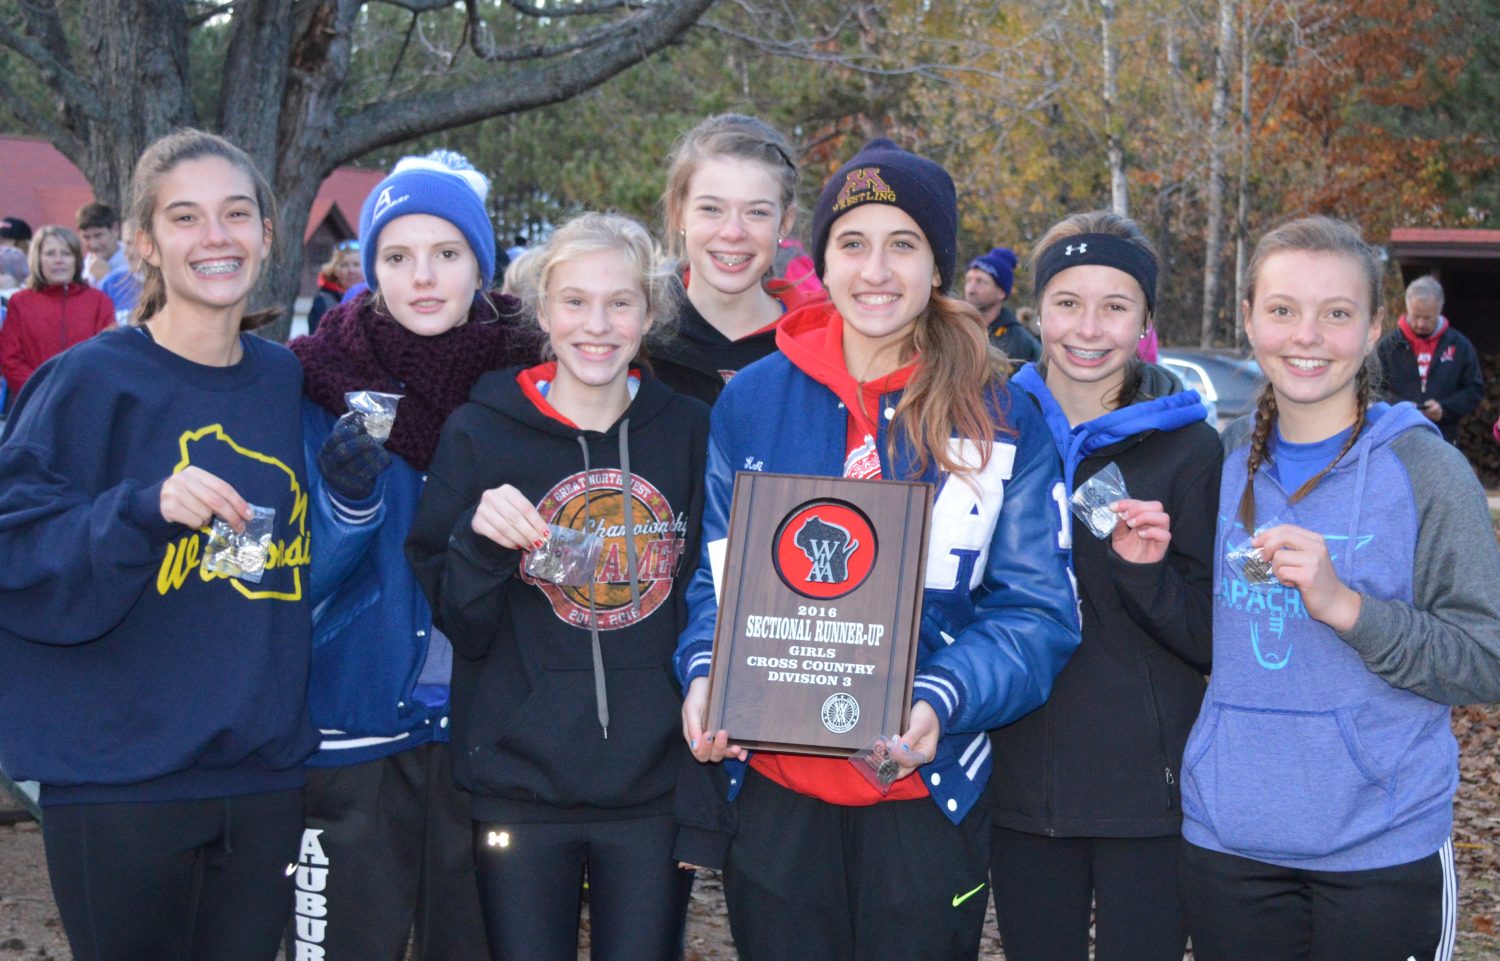 The Auburndale girls cross country team finished second at the WIAA Division 3 sectional at Nine Mile Recreation Area in Rib Mountain on Oct. 21, earning a spot in Saturday’s WIAA State Cross Country Meet. Team members are, from left, Isabella Jewell, Anna Kollross, Vanessa Mitchell, Emmalee Richardson, Kali Karl, Taylor Stanton, and Julianna Kollross.